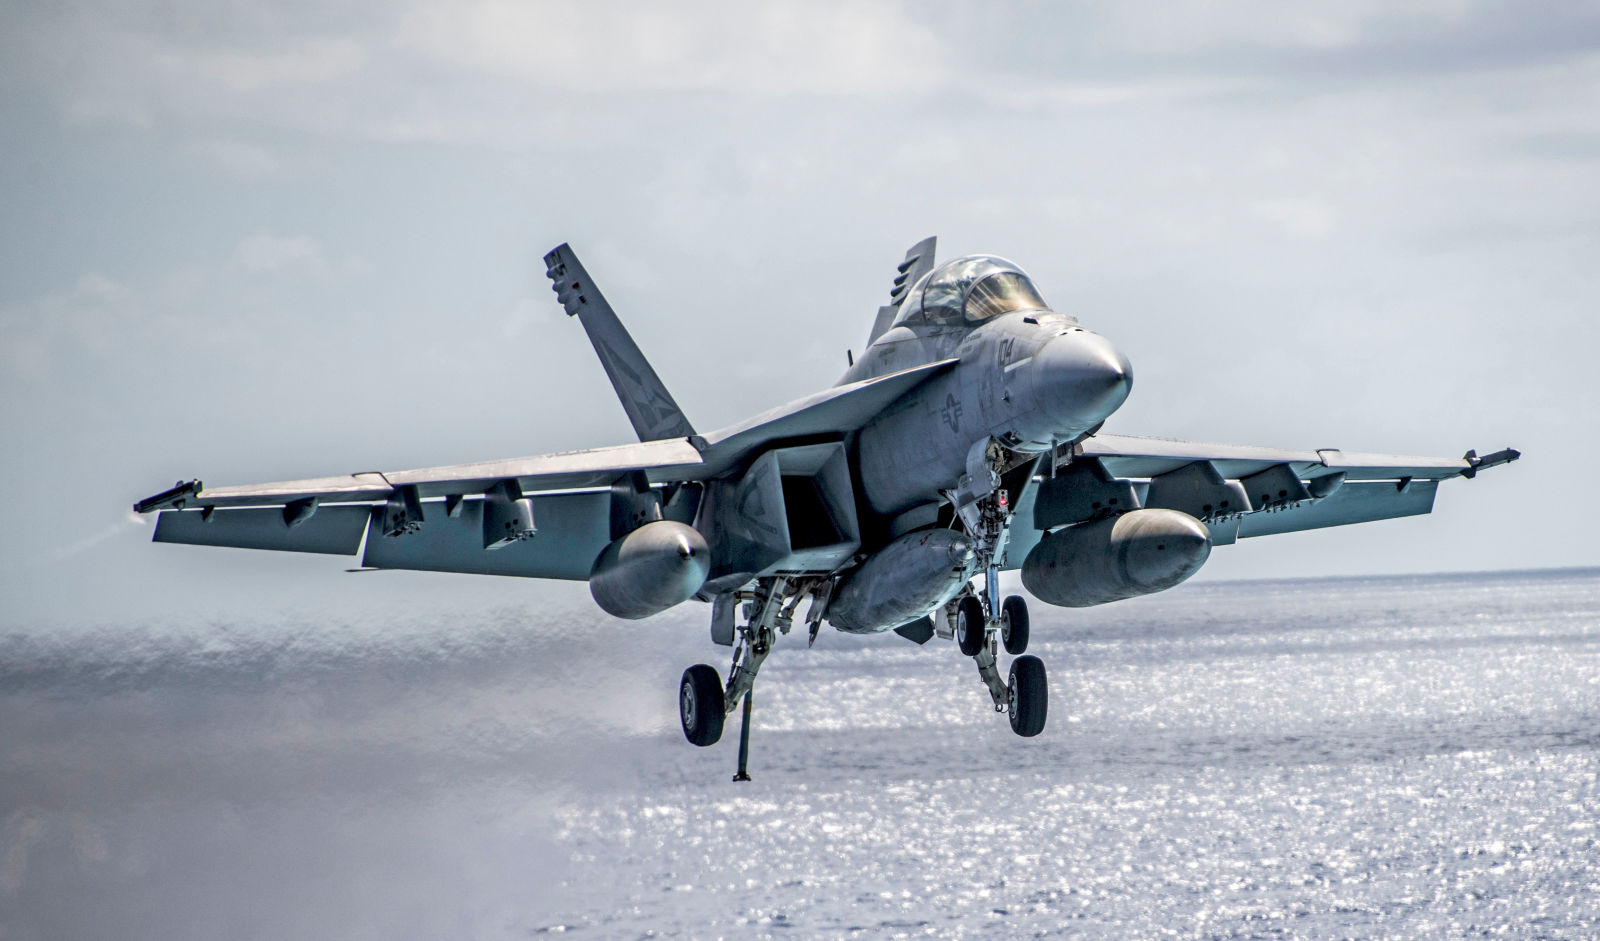 An F/A-18F Super Hornet of Strike Fighter Squadron (VFA) 2 Bounty Hunters prepares to make an arrested landing on the aircraft carrier USS Carl Vinson (CVN 70) during the 2018 Rim of the Pacific Exercise. (US Navy)